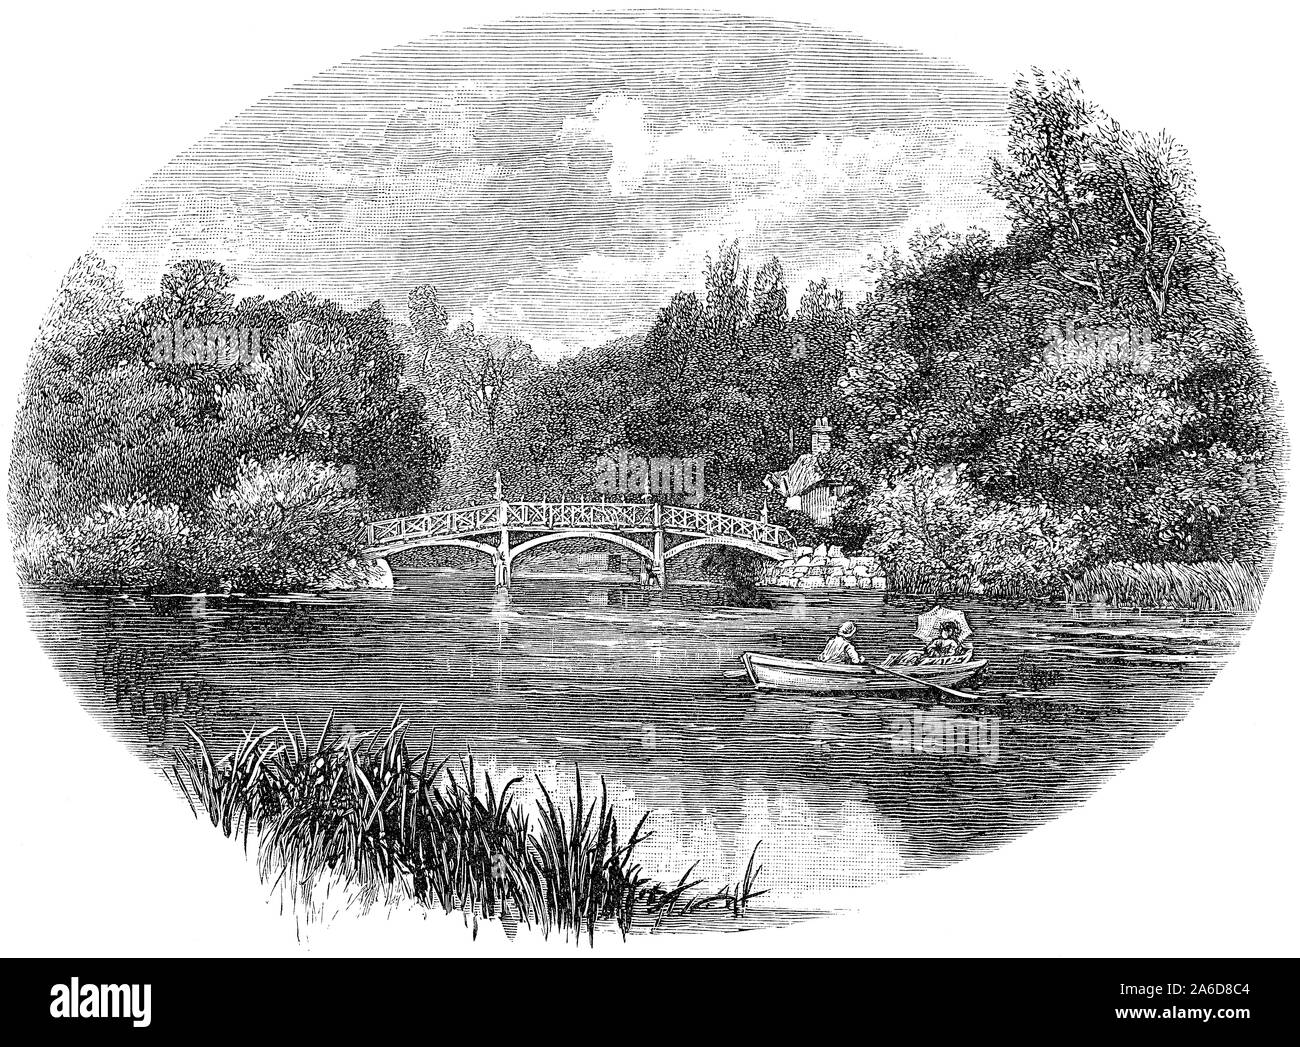 1891 engraving of a bridge over the River Thames at the village of Nuneham Courtenay in Oxfordshire, England. Stock Photo